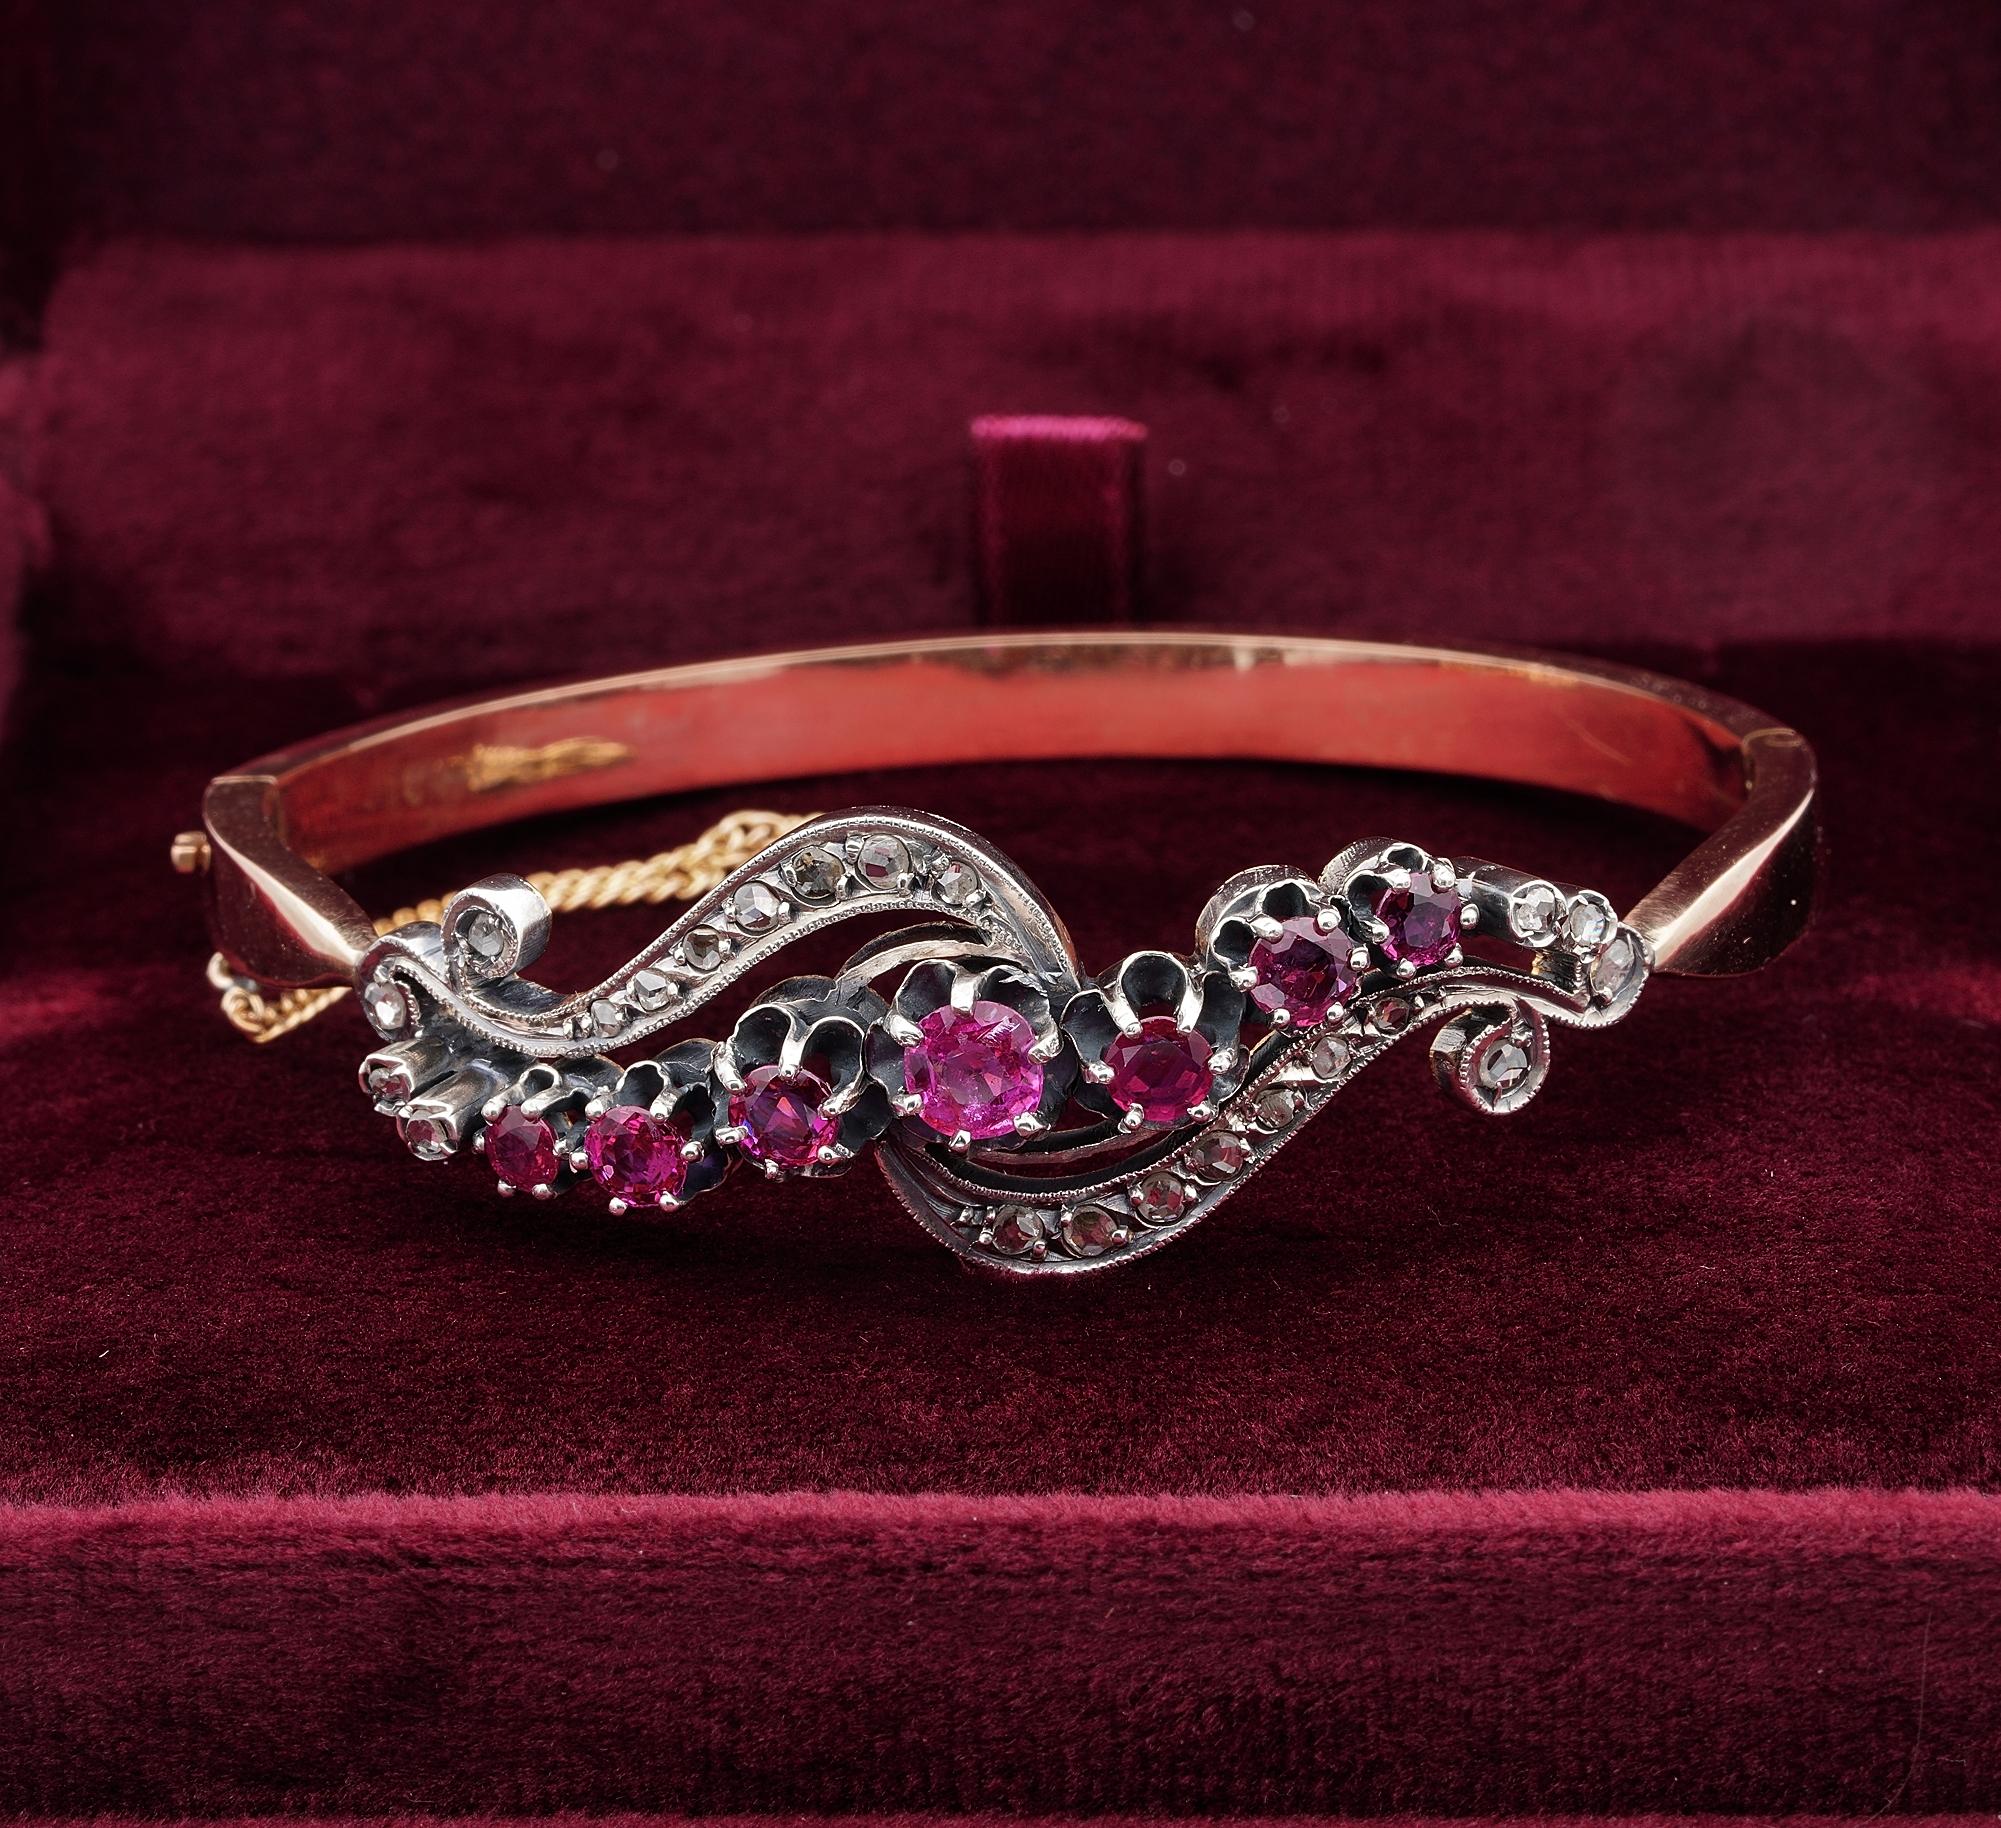 Memorable Victorian

Superb Victorian period antique bangle – bears a full series of French hallmarks
Boasting glorious workmanship of the time with lovely ESSE like shaped motifs, enriched with natural no heat Rubies and rose cut Diamonds